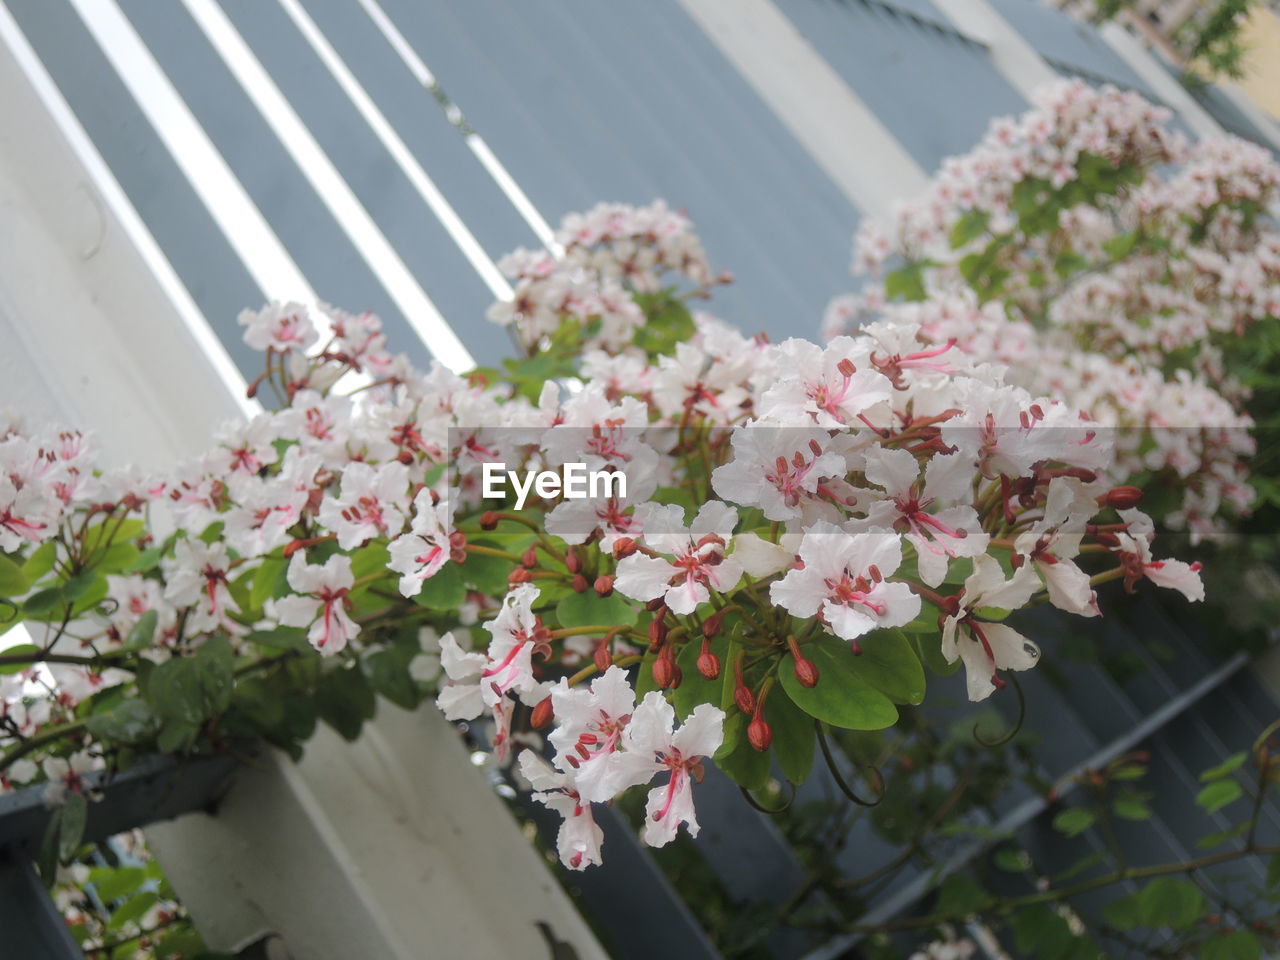 plant, flower, flowering plant, beauty in nature, freshness, fragility, growth, nature, pink, springtime, blossom, day, outdoors, branch, no people, architecture, close-up, tree, botany, focus on foreground, white, built structure, spring, building exterior, flower head, shrub, inflorescence, petal, cherry blossom